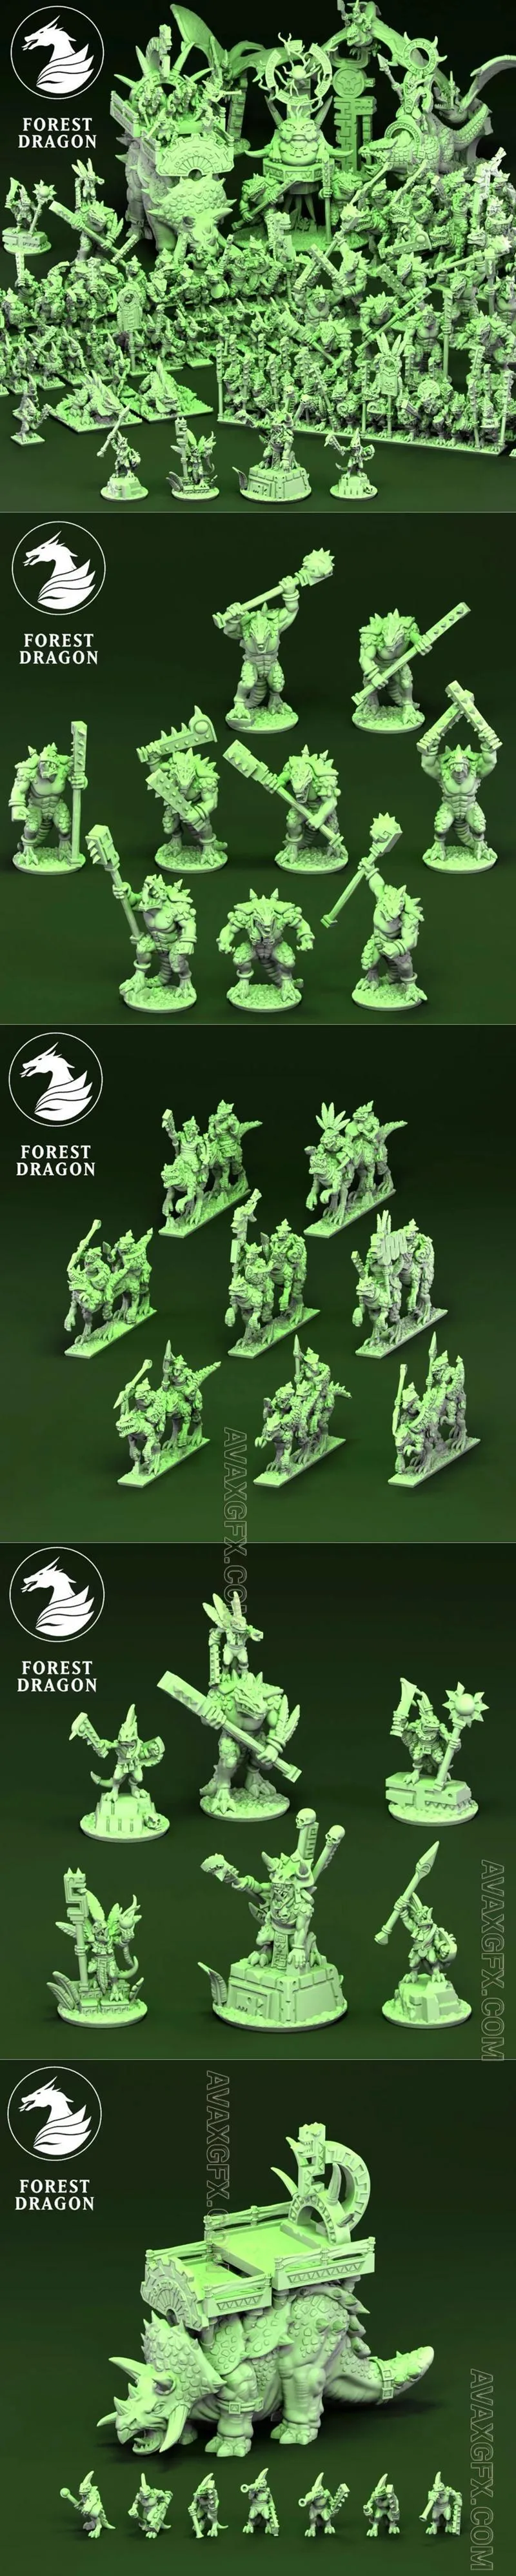 Forest Dragon - Reptilian Army Complete - STL 3D Model